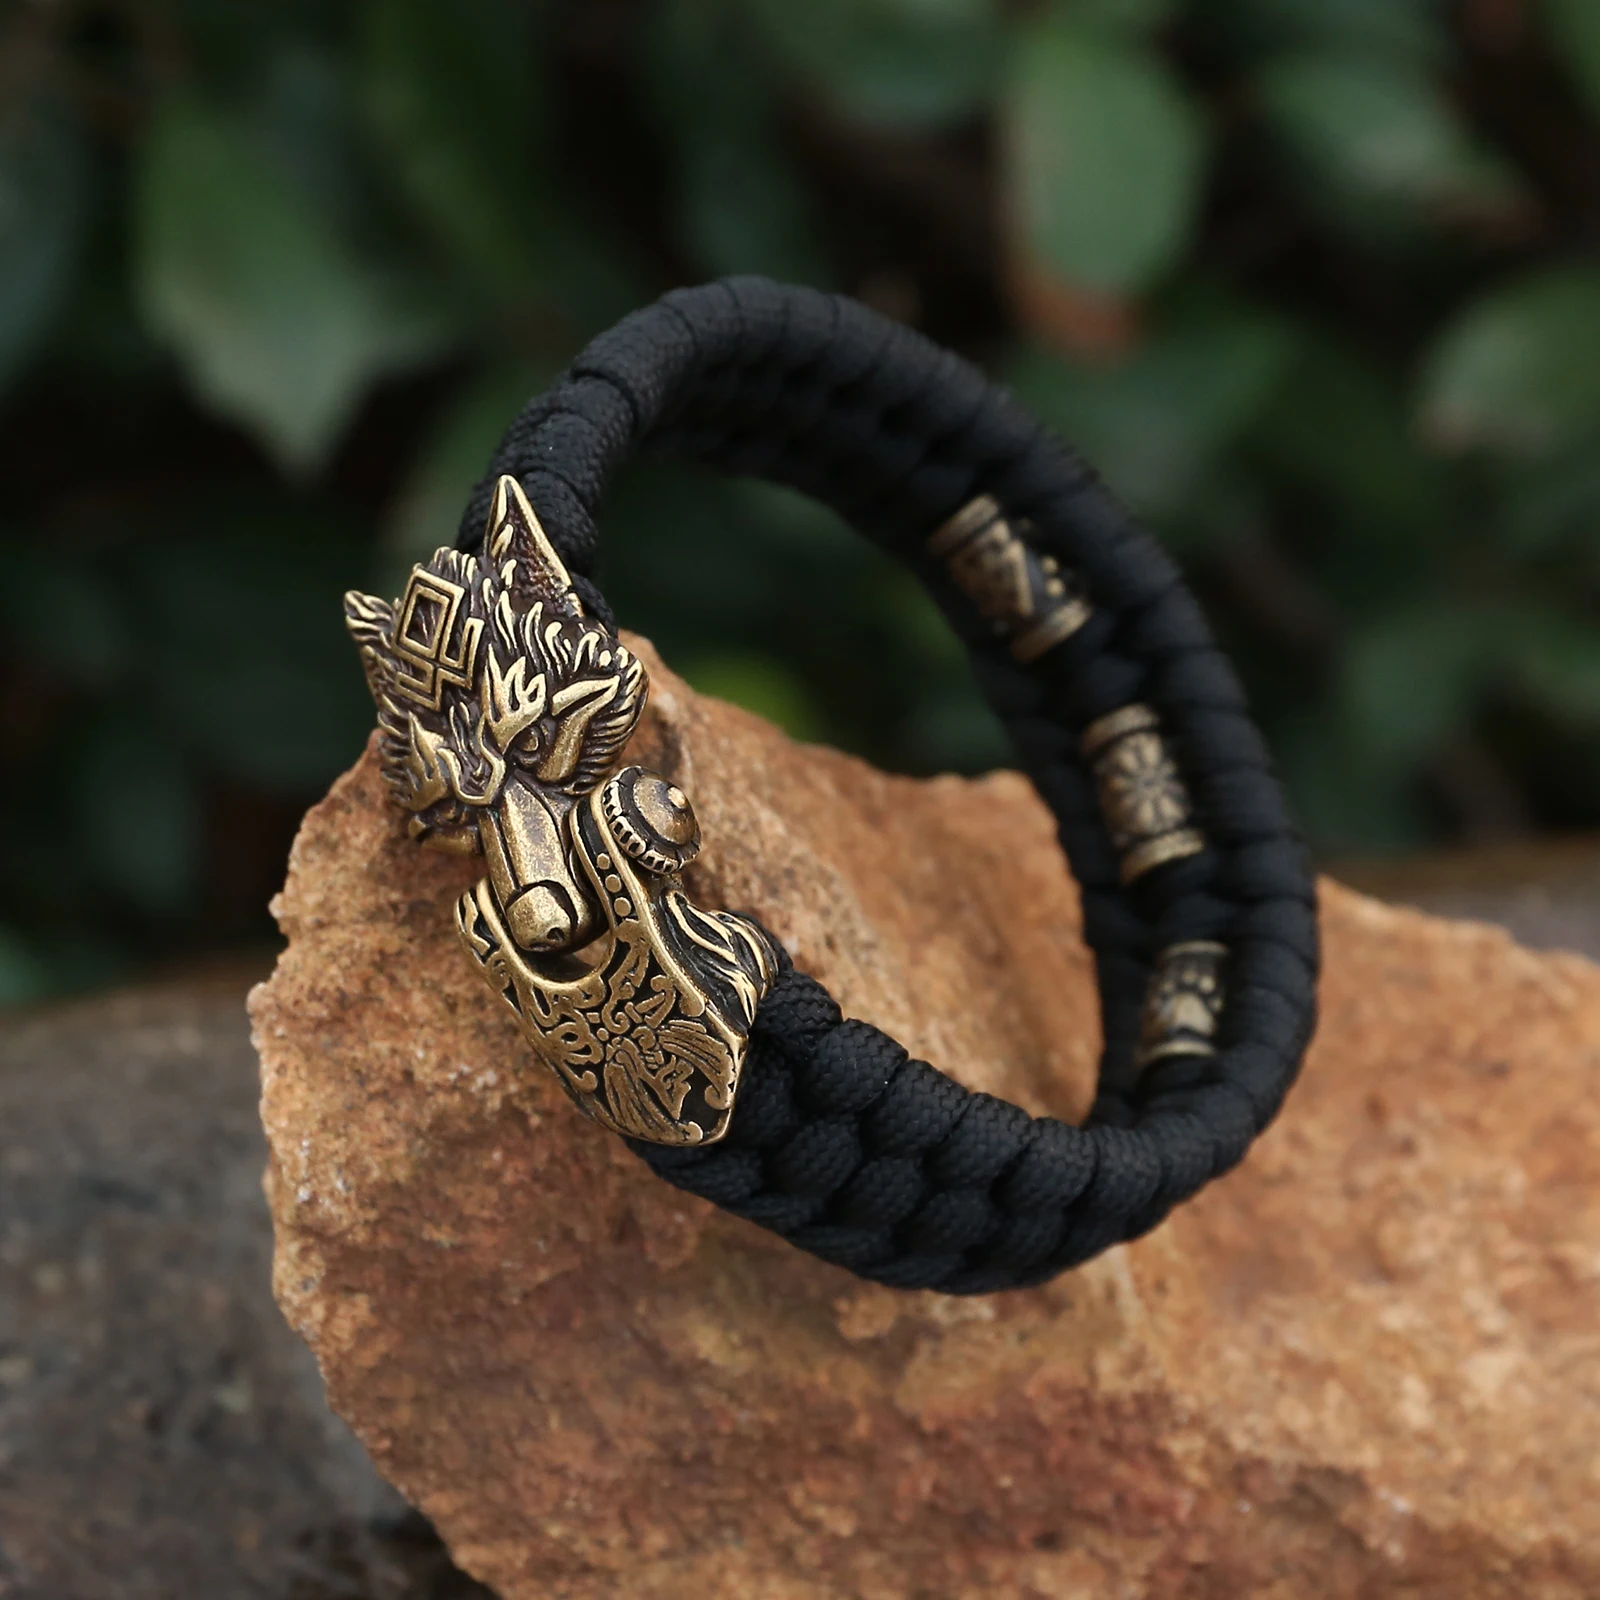 Handmade Mens Rope Bracelet With Bronze Colored Stainless Steel Wolf Head Closure